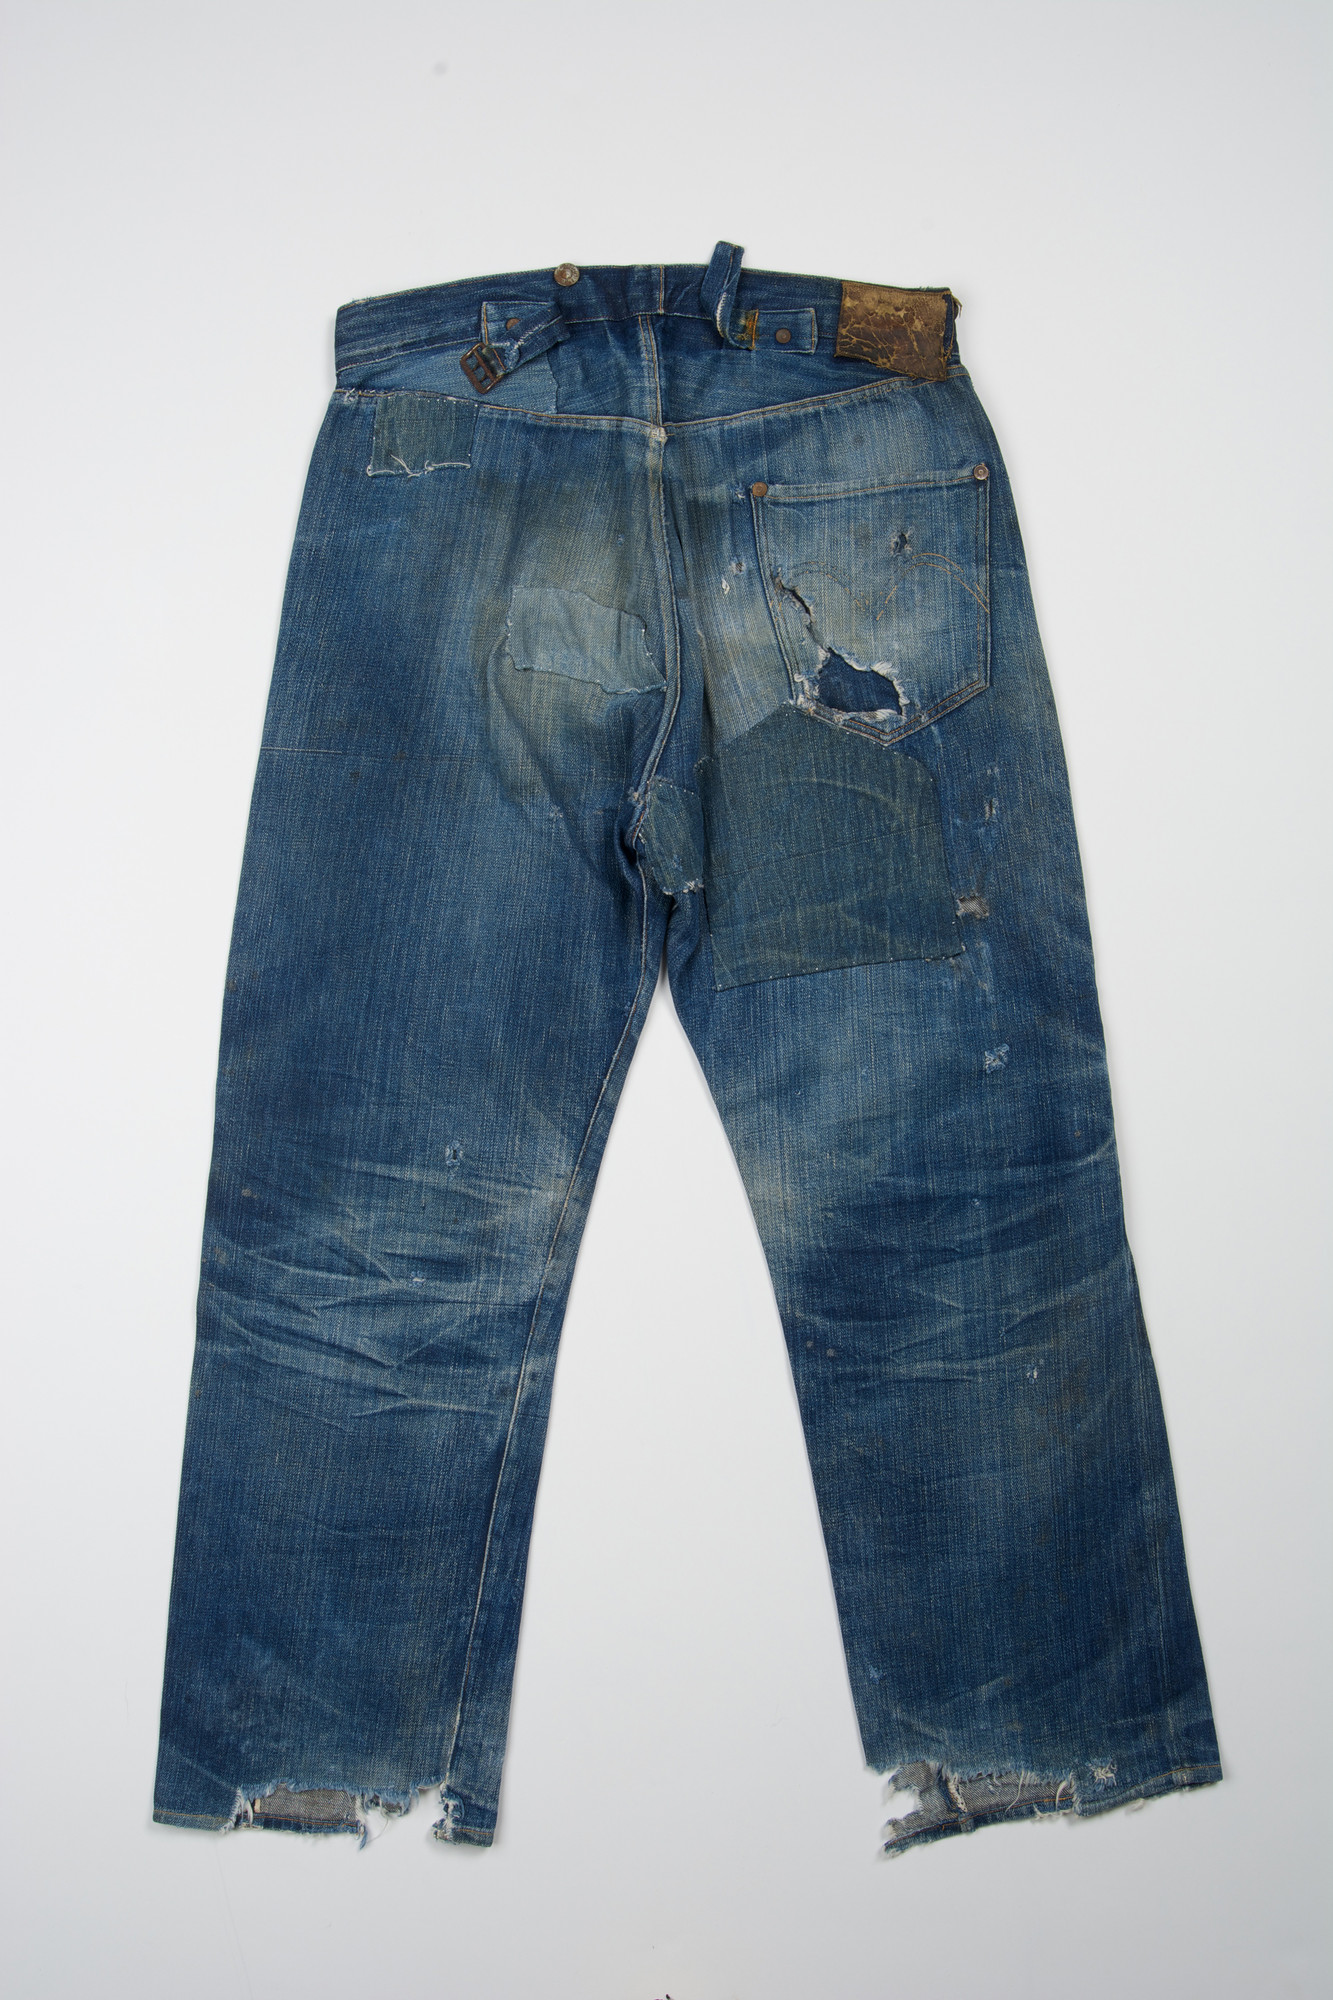  Levi  Strauss Co Jeans  1890 MoMA